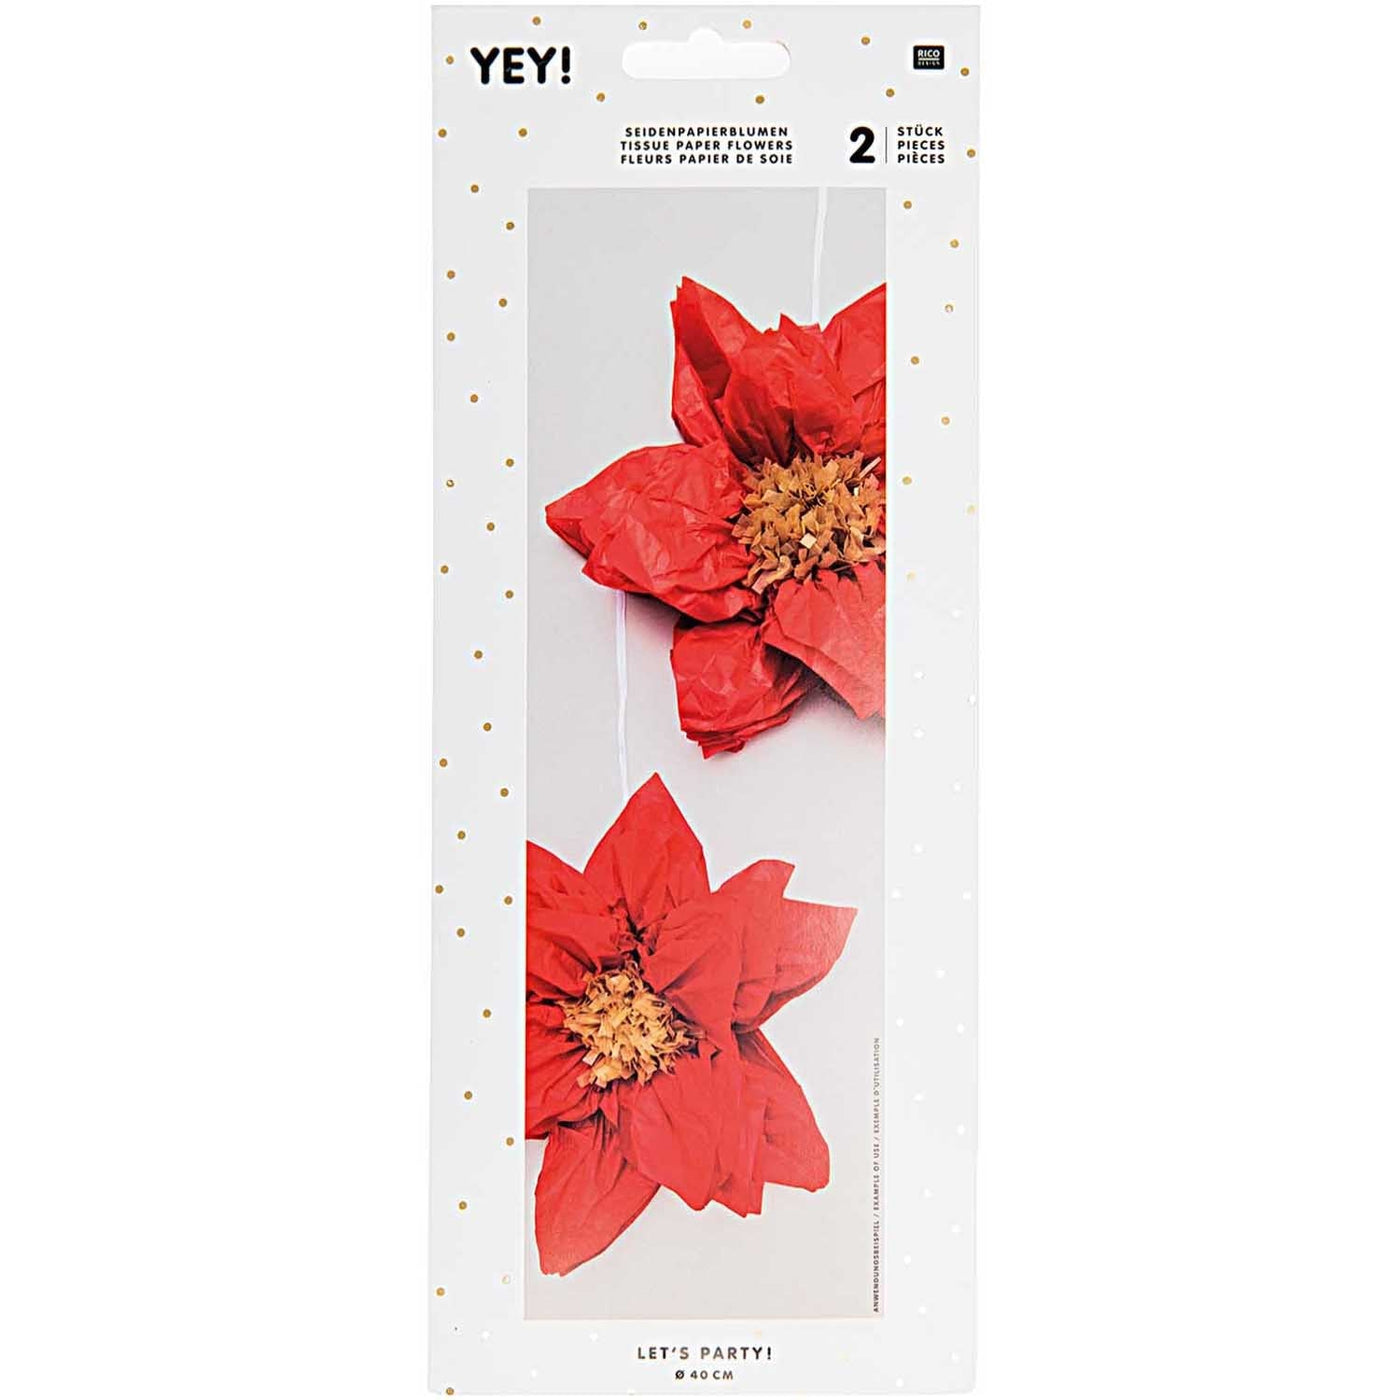 Decorative Tissue Paper Flowers - Large Red Poinsettia - Pack of 2